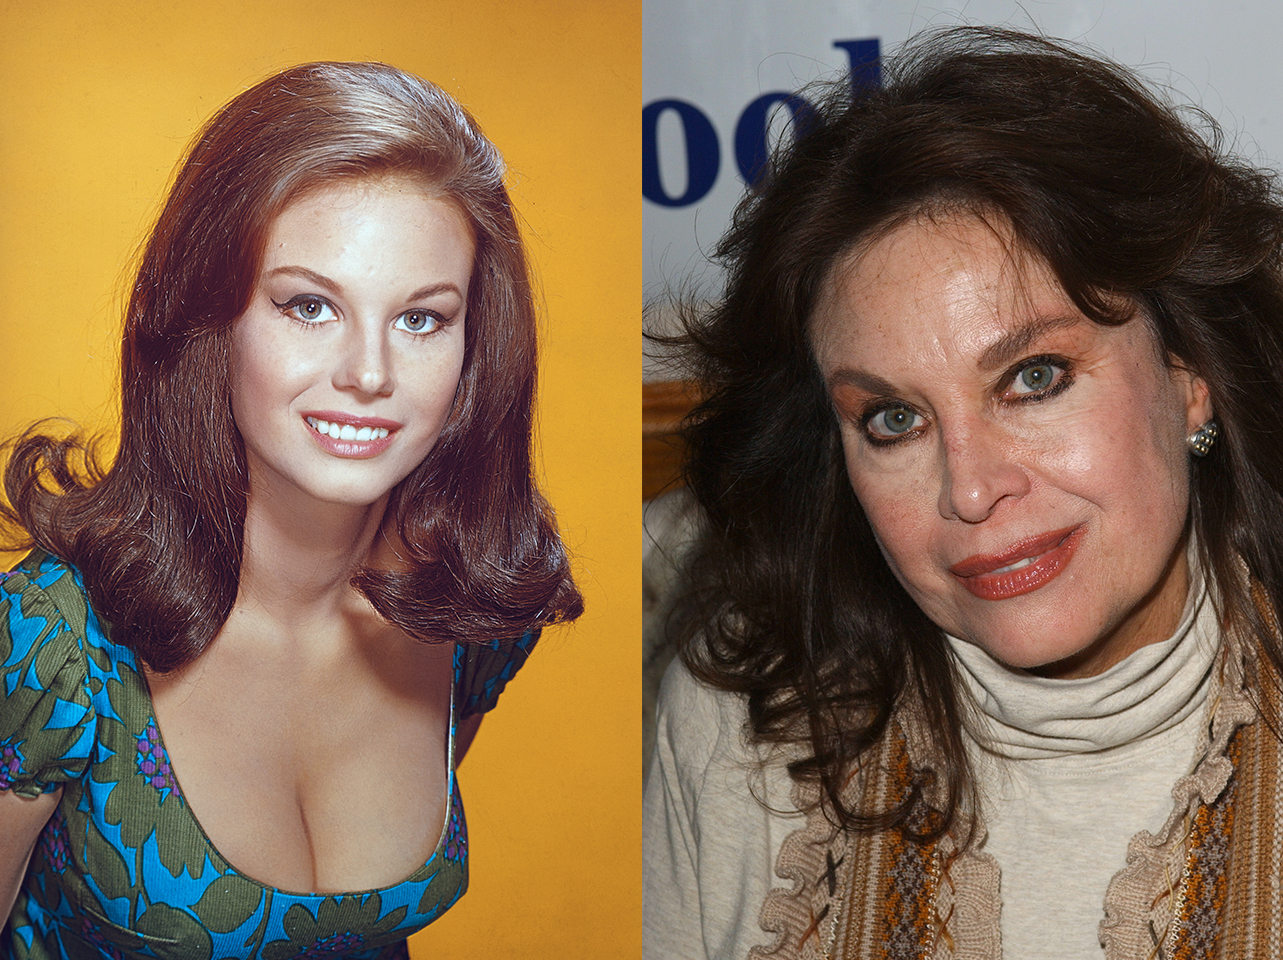 Lana Wood in 1960 | Lana Wood in 2007 | Source: Getty Images